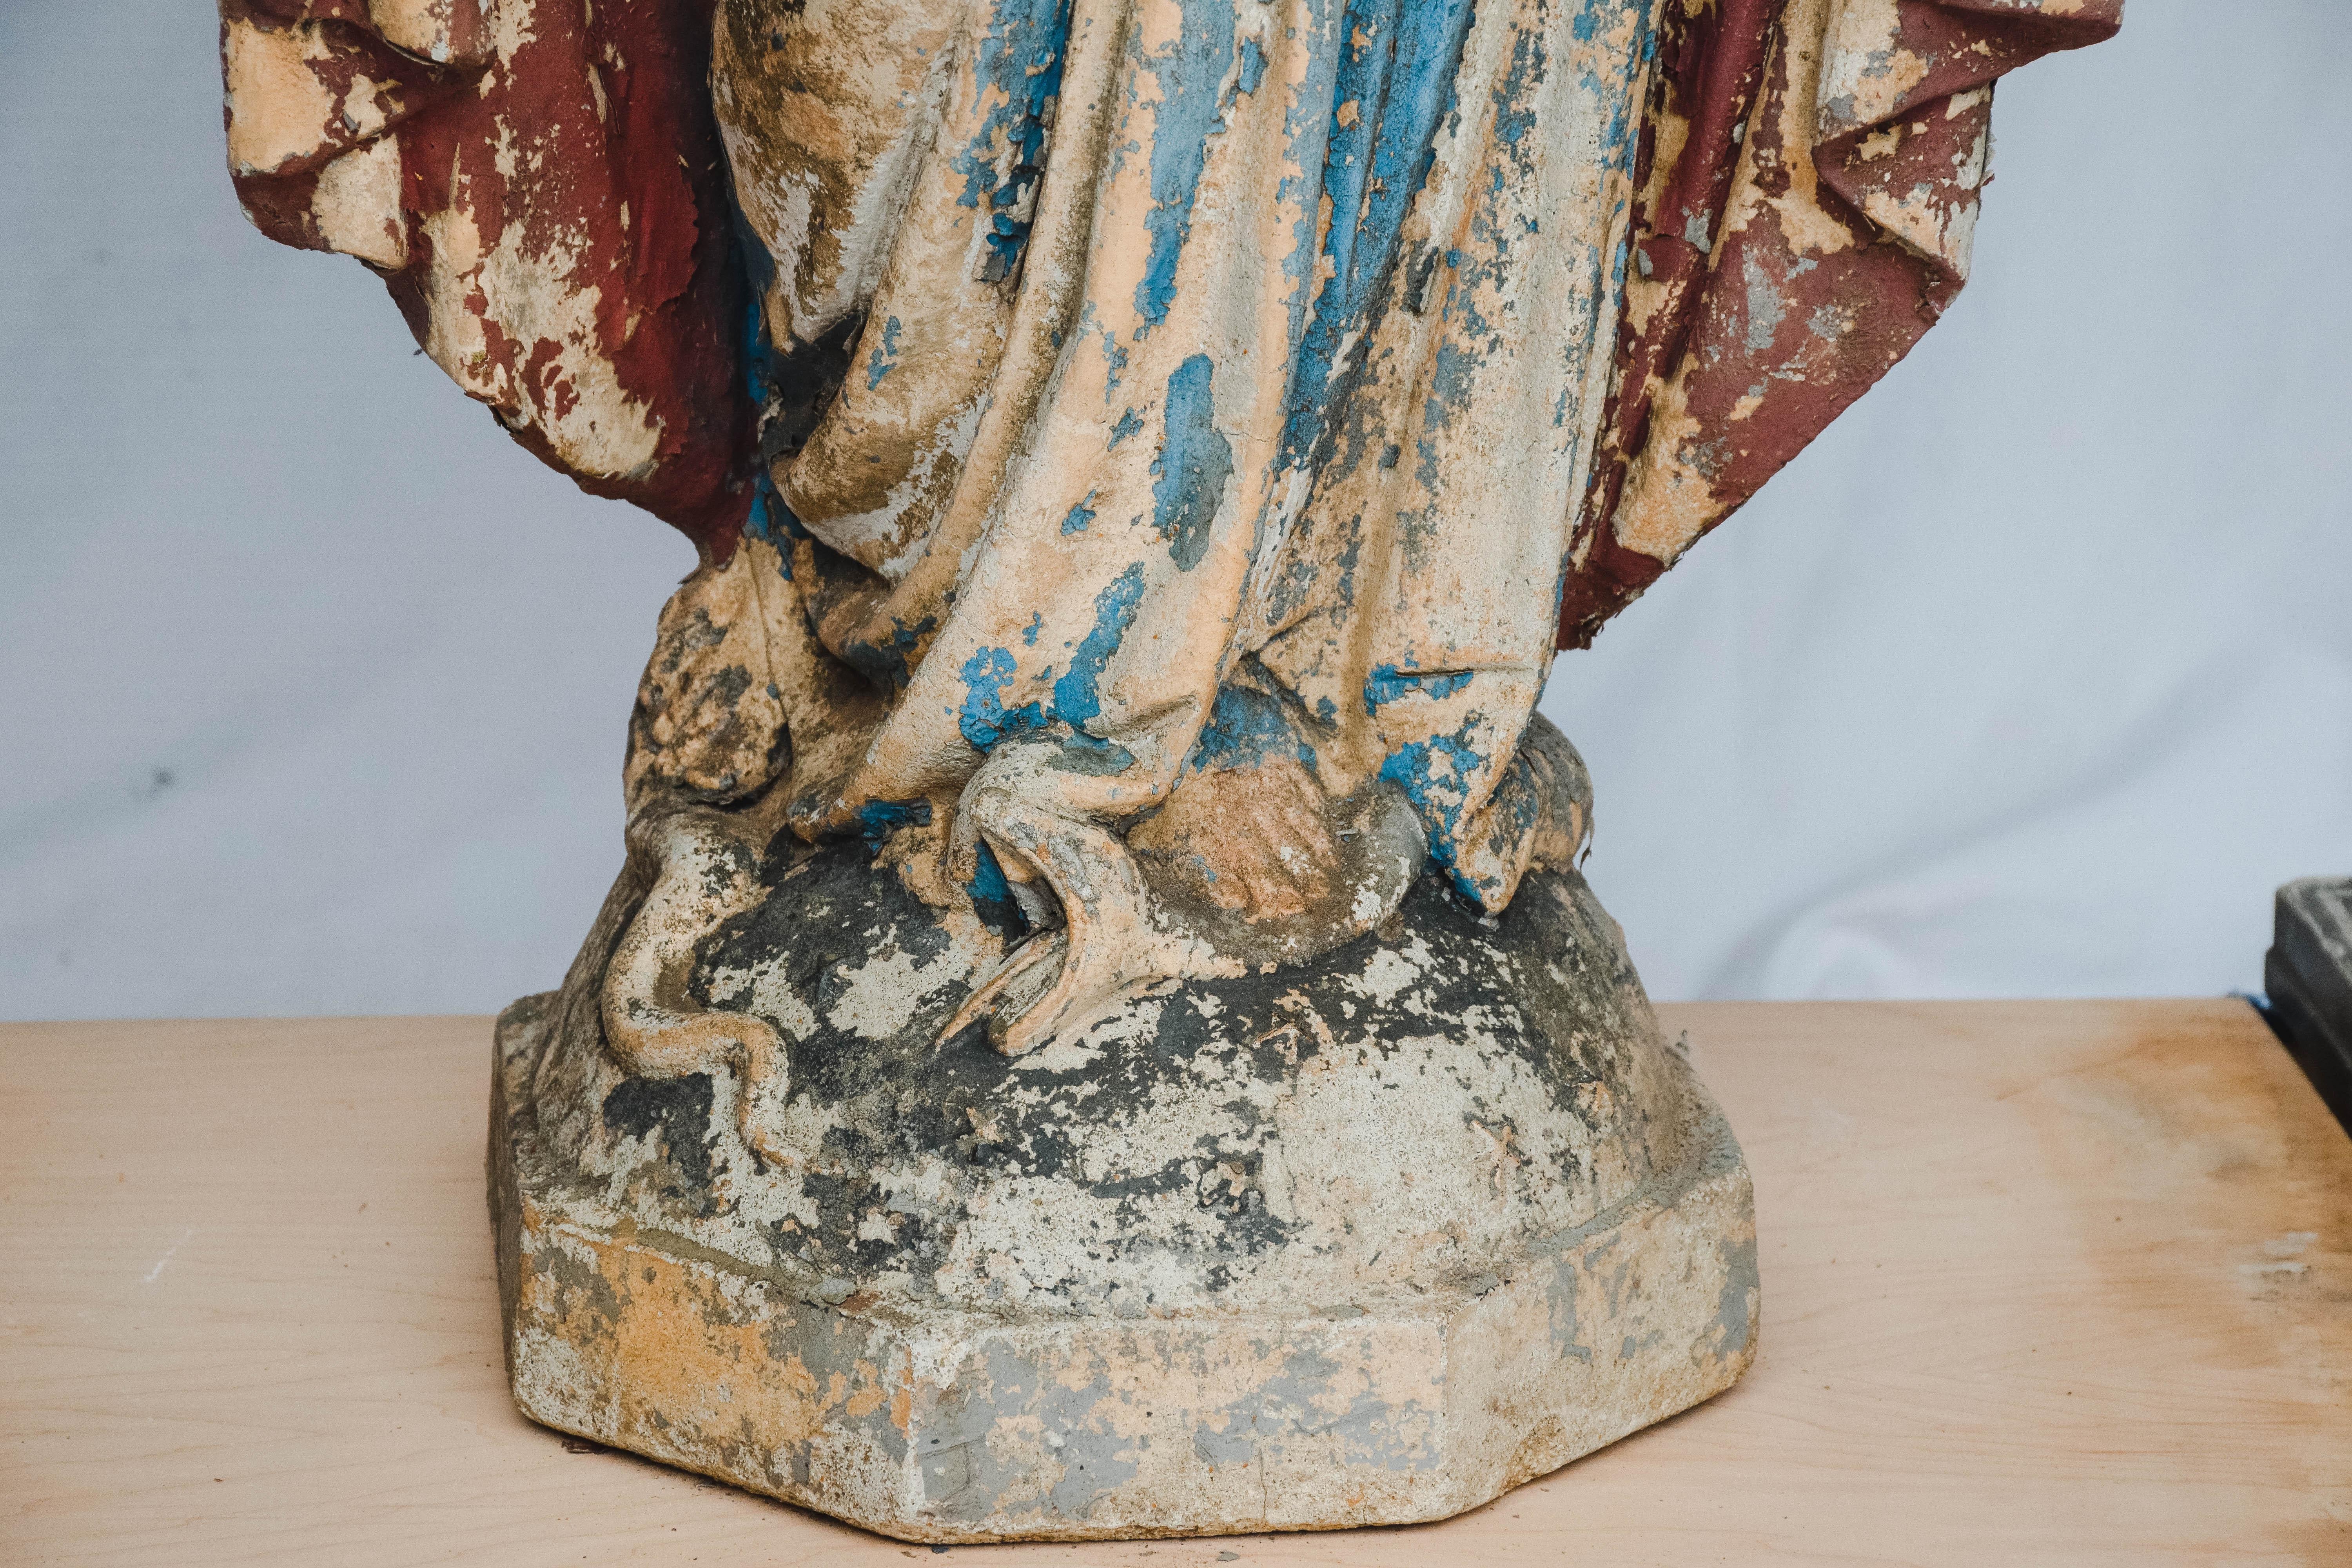 This is a concrete statue of The Virgin Mary. We believe this statue was once used outside of a church. The paint has worn leaving a wonderful aged patina. This beautiful statue could be used in your home or garden.